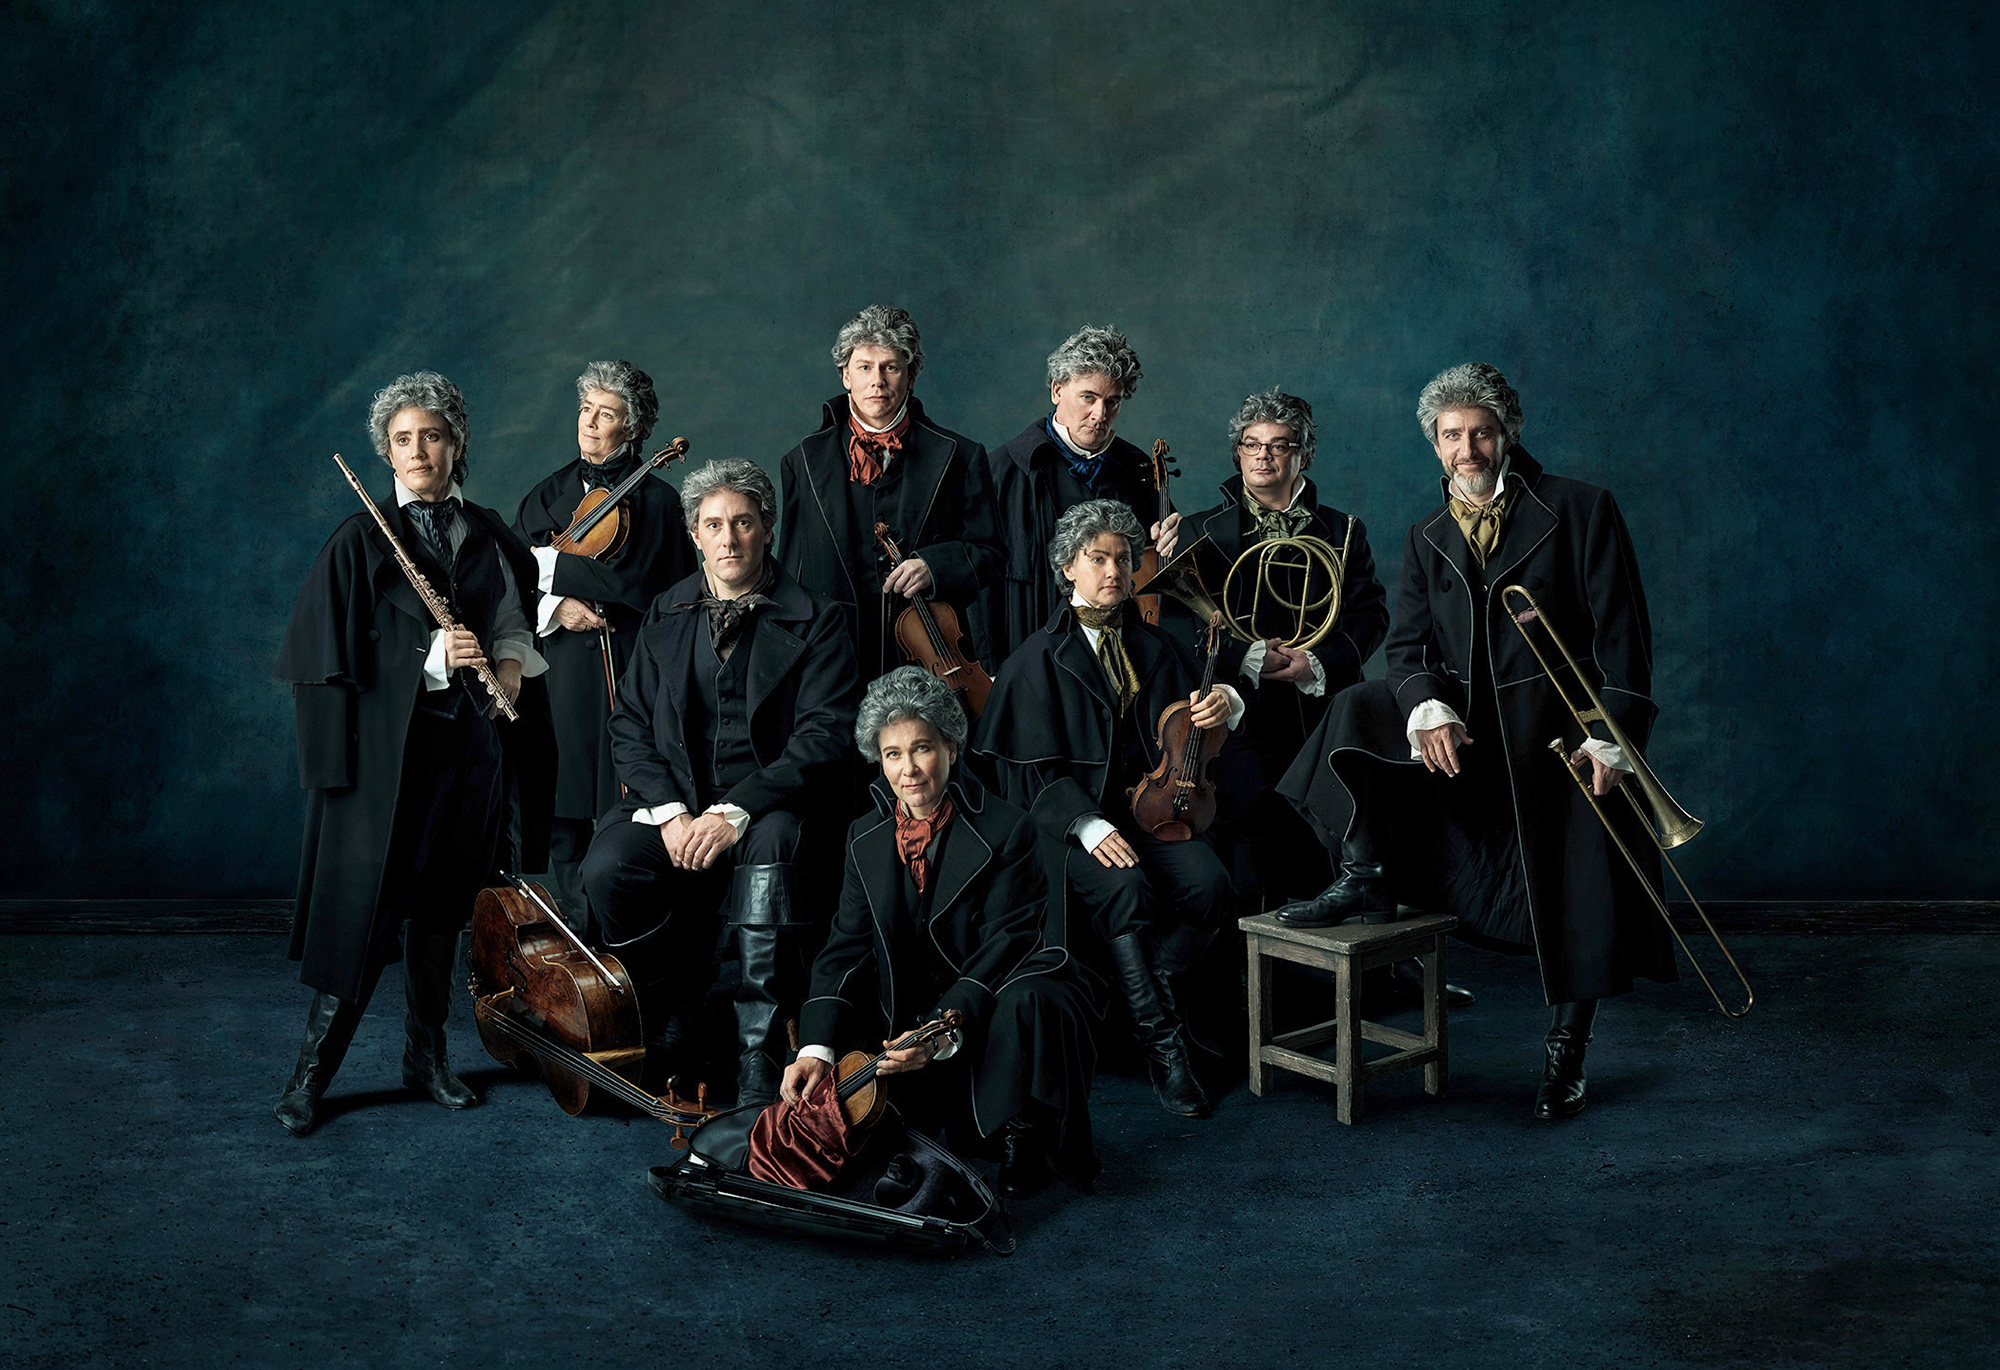 A musical ensemble holding various musical instruments. The group consists of eight individuals posing against a dark, textured background. Each person is holding a musical instrument, including a violin, trumpet, and horn. They are dressed in formal black coats and trousers, with white shirts and neckties. One person is seated on a chair while the rest are standing or sitting on the floor. The lighting in the image is soft yet dramatic, giving the picture an artistic appearance.